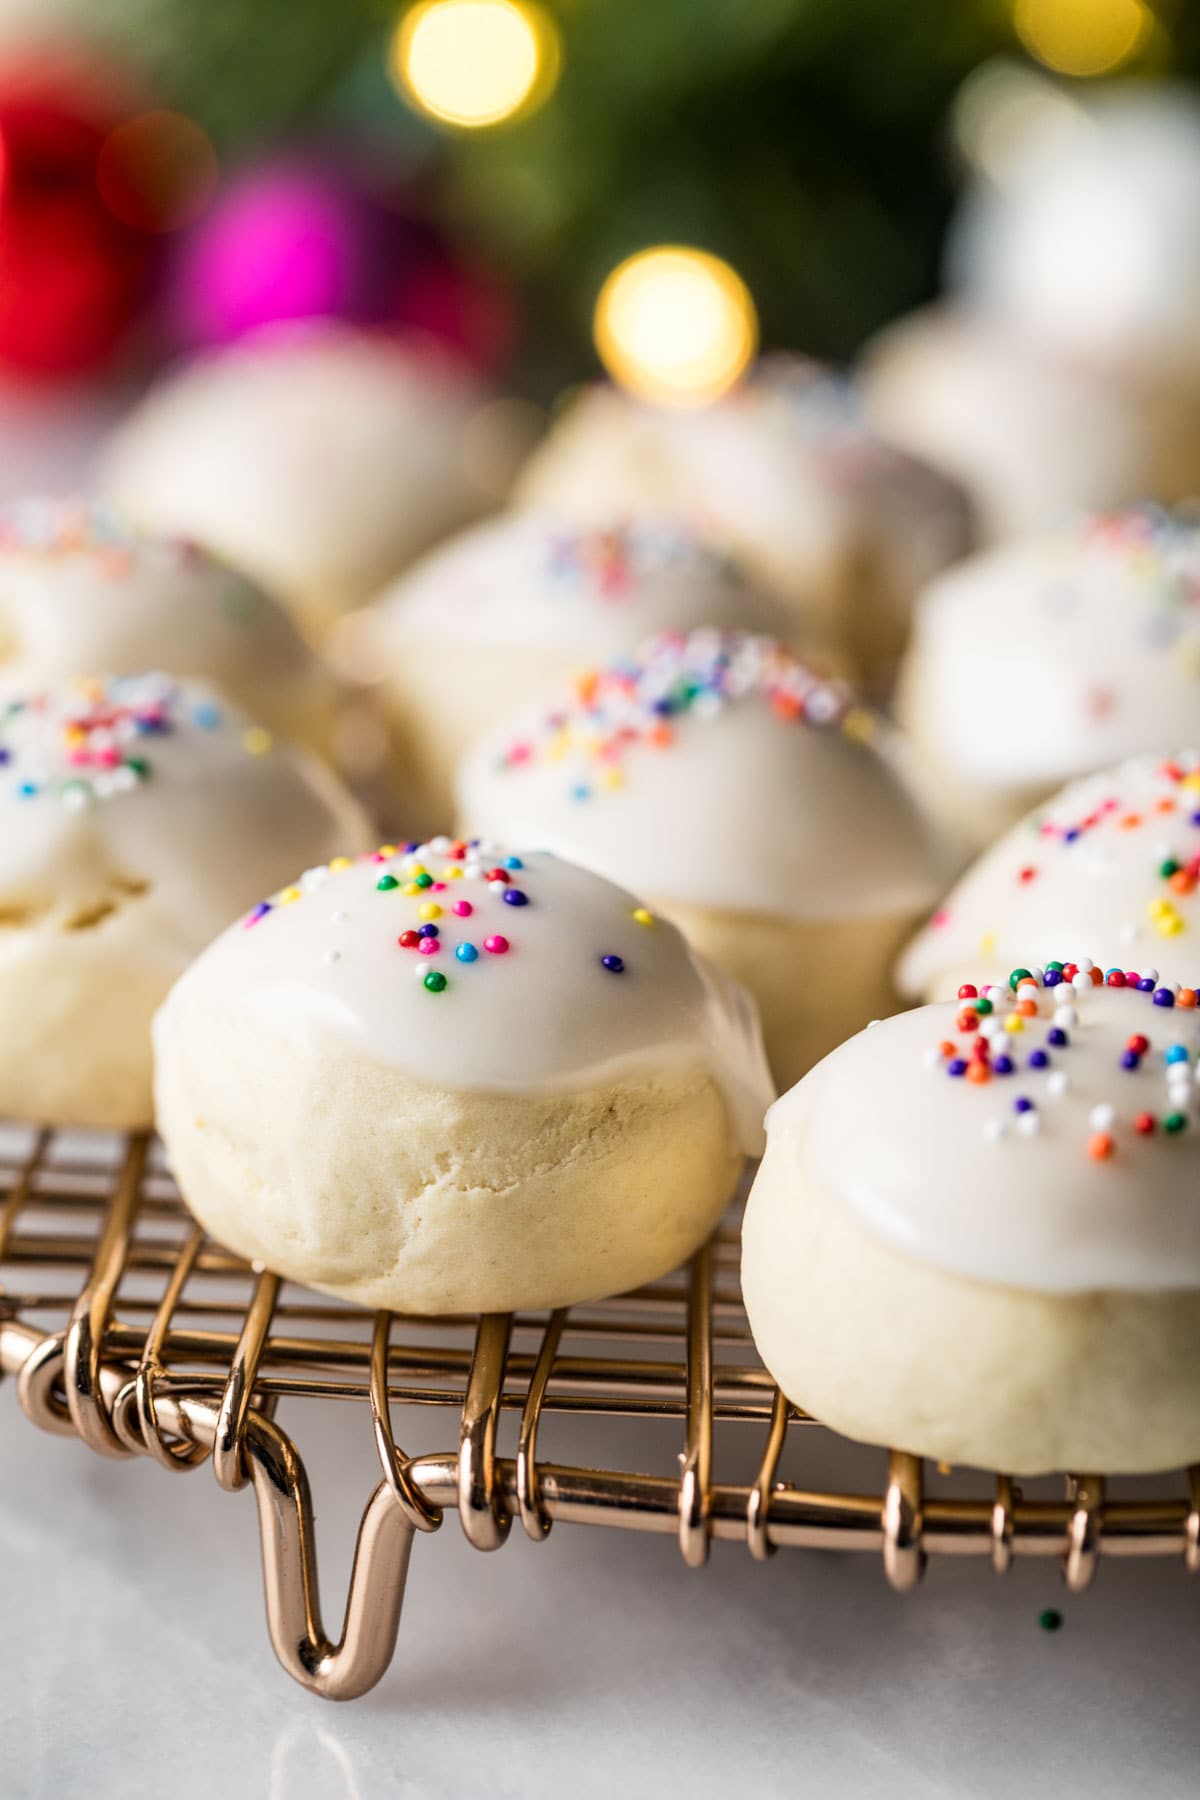 Close-up view of pillowy, round cookies topped with a white icing and rainbow sprinkles.